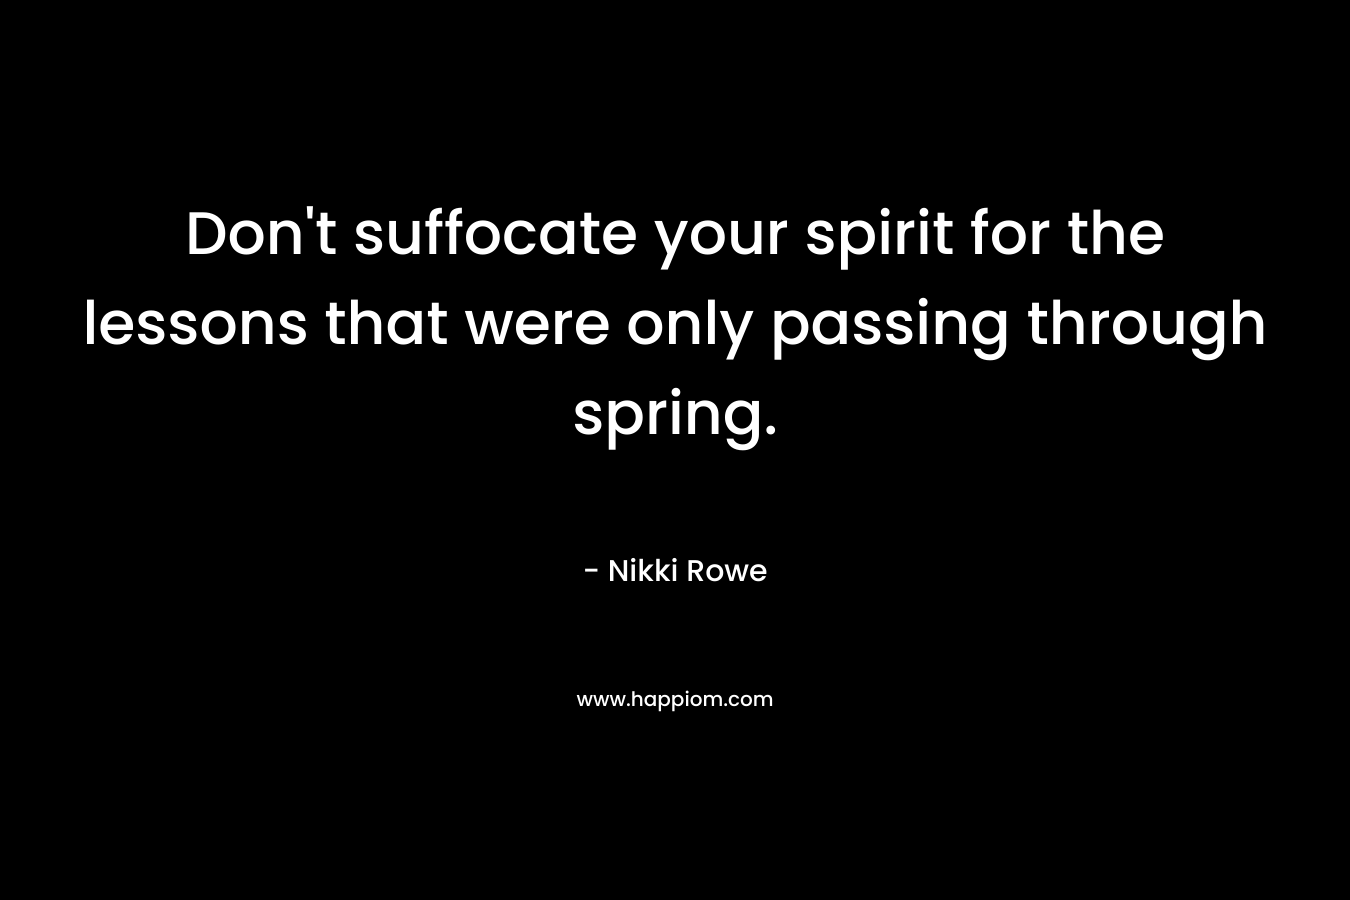 Don't suffocate your spirit for the lessons that were only passing through spring.